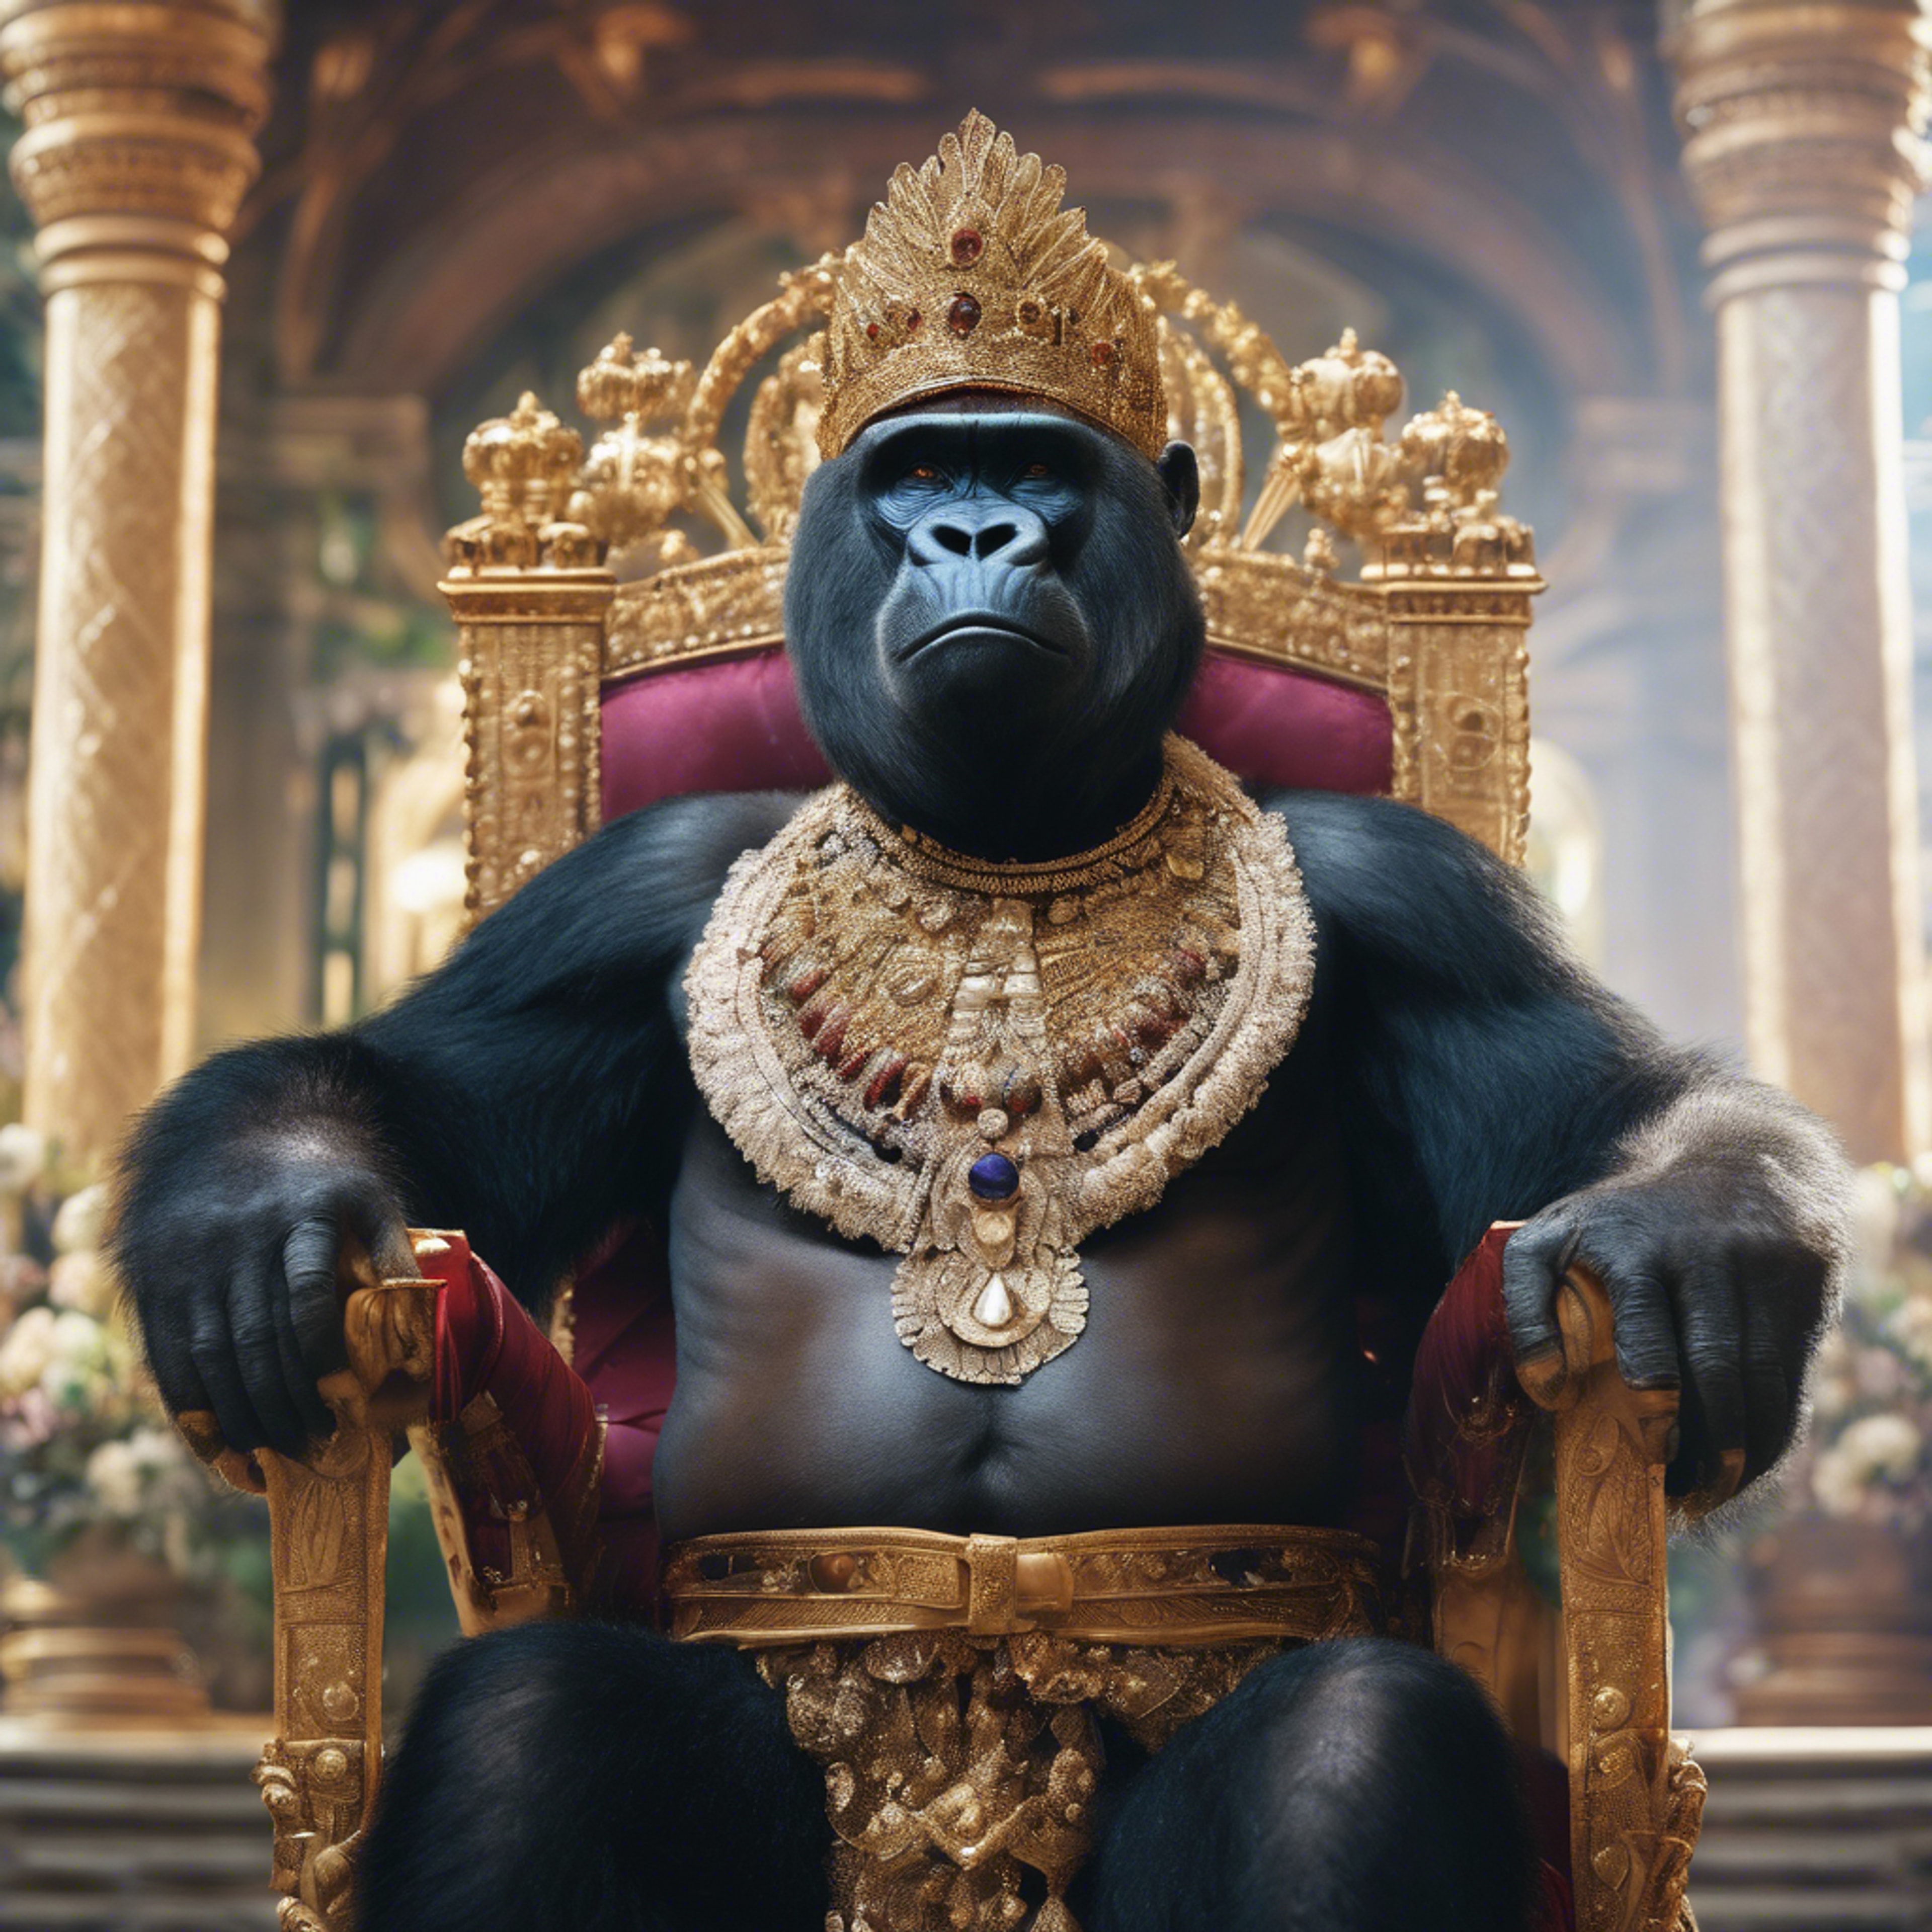 A regal gorilla queen, adorned in beautiful garments, graciously receiving her subjects in a forest throne room. Wallpaper[bd11d72f295747a289c1]